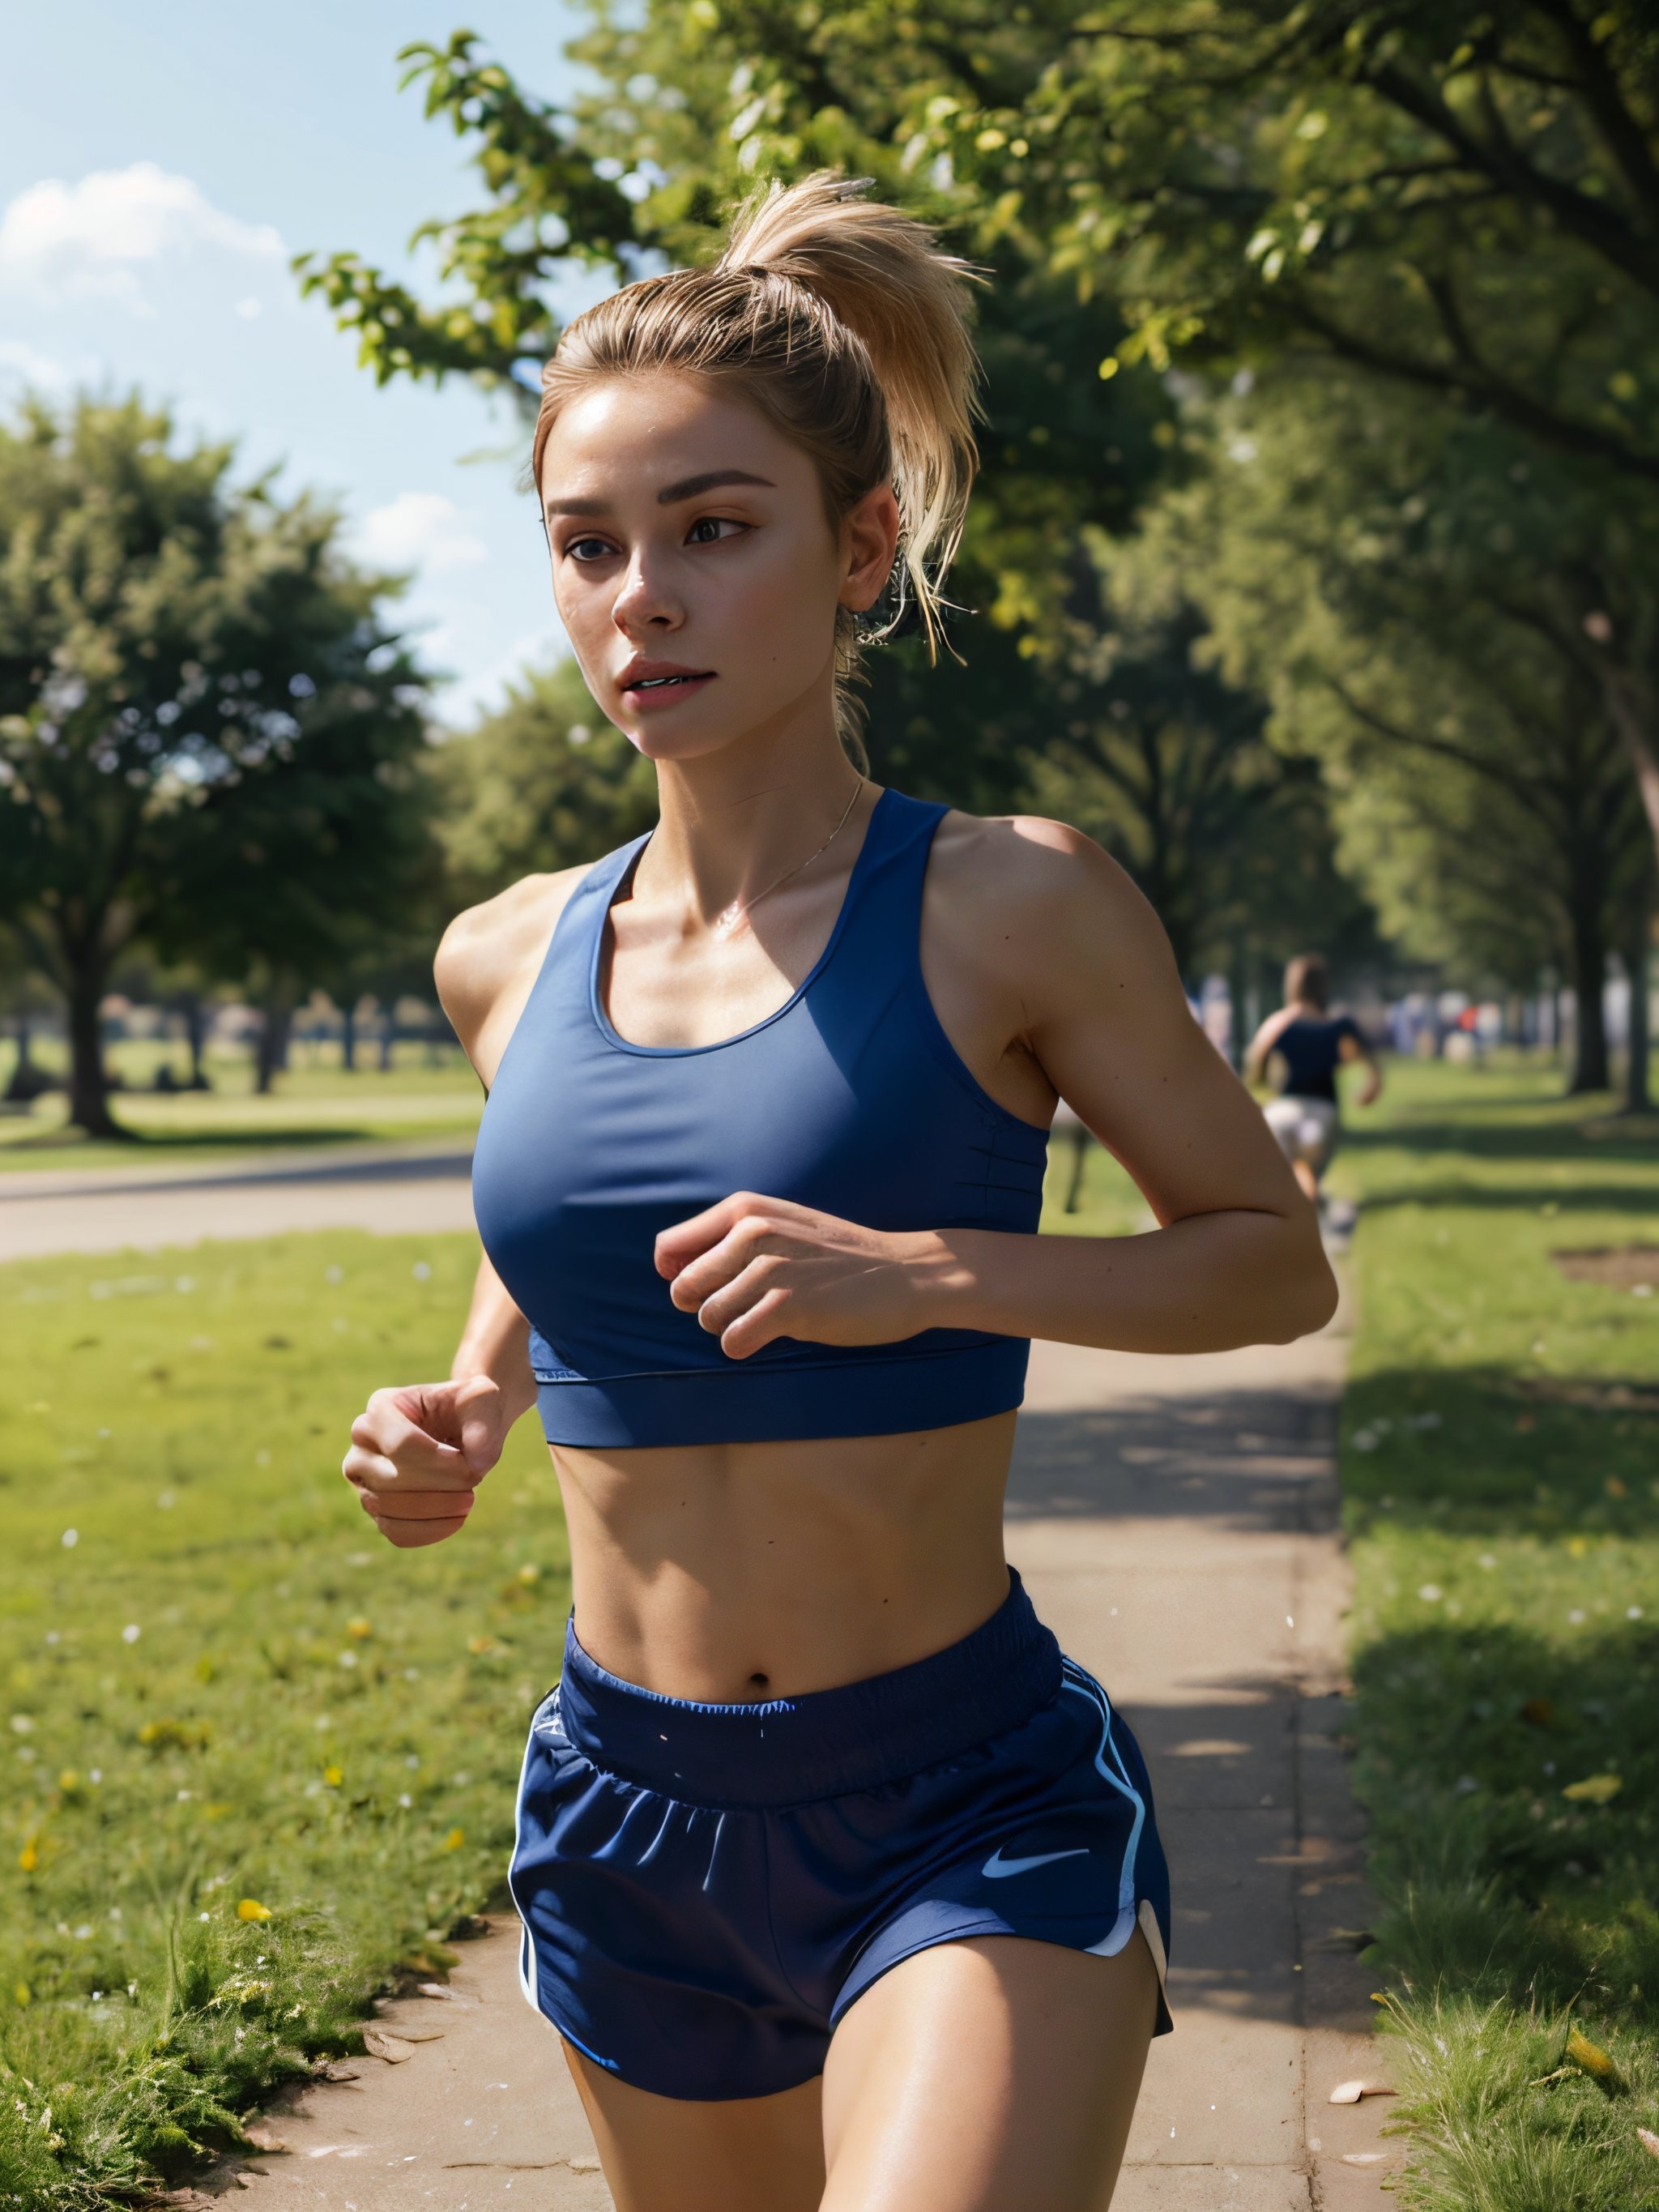 photorealistic 21-year-old female influencer with blue eyes and perfect blonde hair tied in a high ponytail. She is jogging in a park, wearing athletic wear suitable for jogging. The photo captures her full body, including legs, in motion. Other park visitors are seen in the background, enjoying the outdoors and greenery." also focus on the deatil quailty of focus detal on eyes focus on hair focus deail environment focus detail on sky focus detal on body detail on face focus detail skin tone focus detal on background focus detail on nose focus detail on mounth focus deatail on lips remove all low quailty remove all generated features remove glitches raise the quailty to 8k HDD